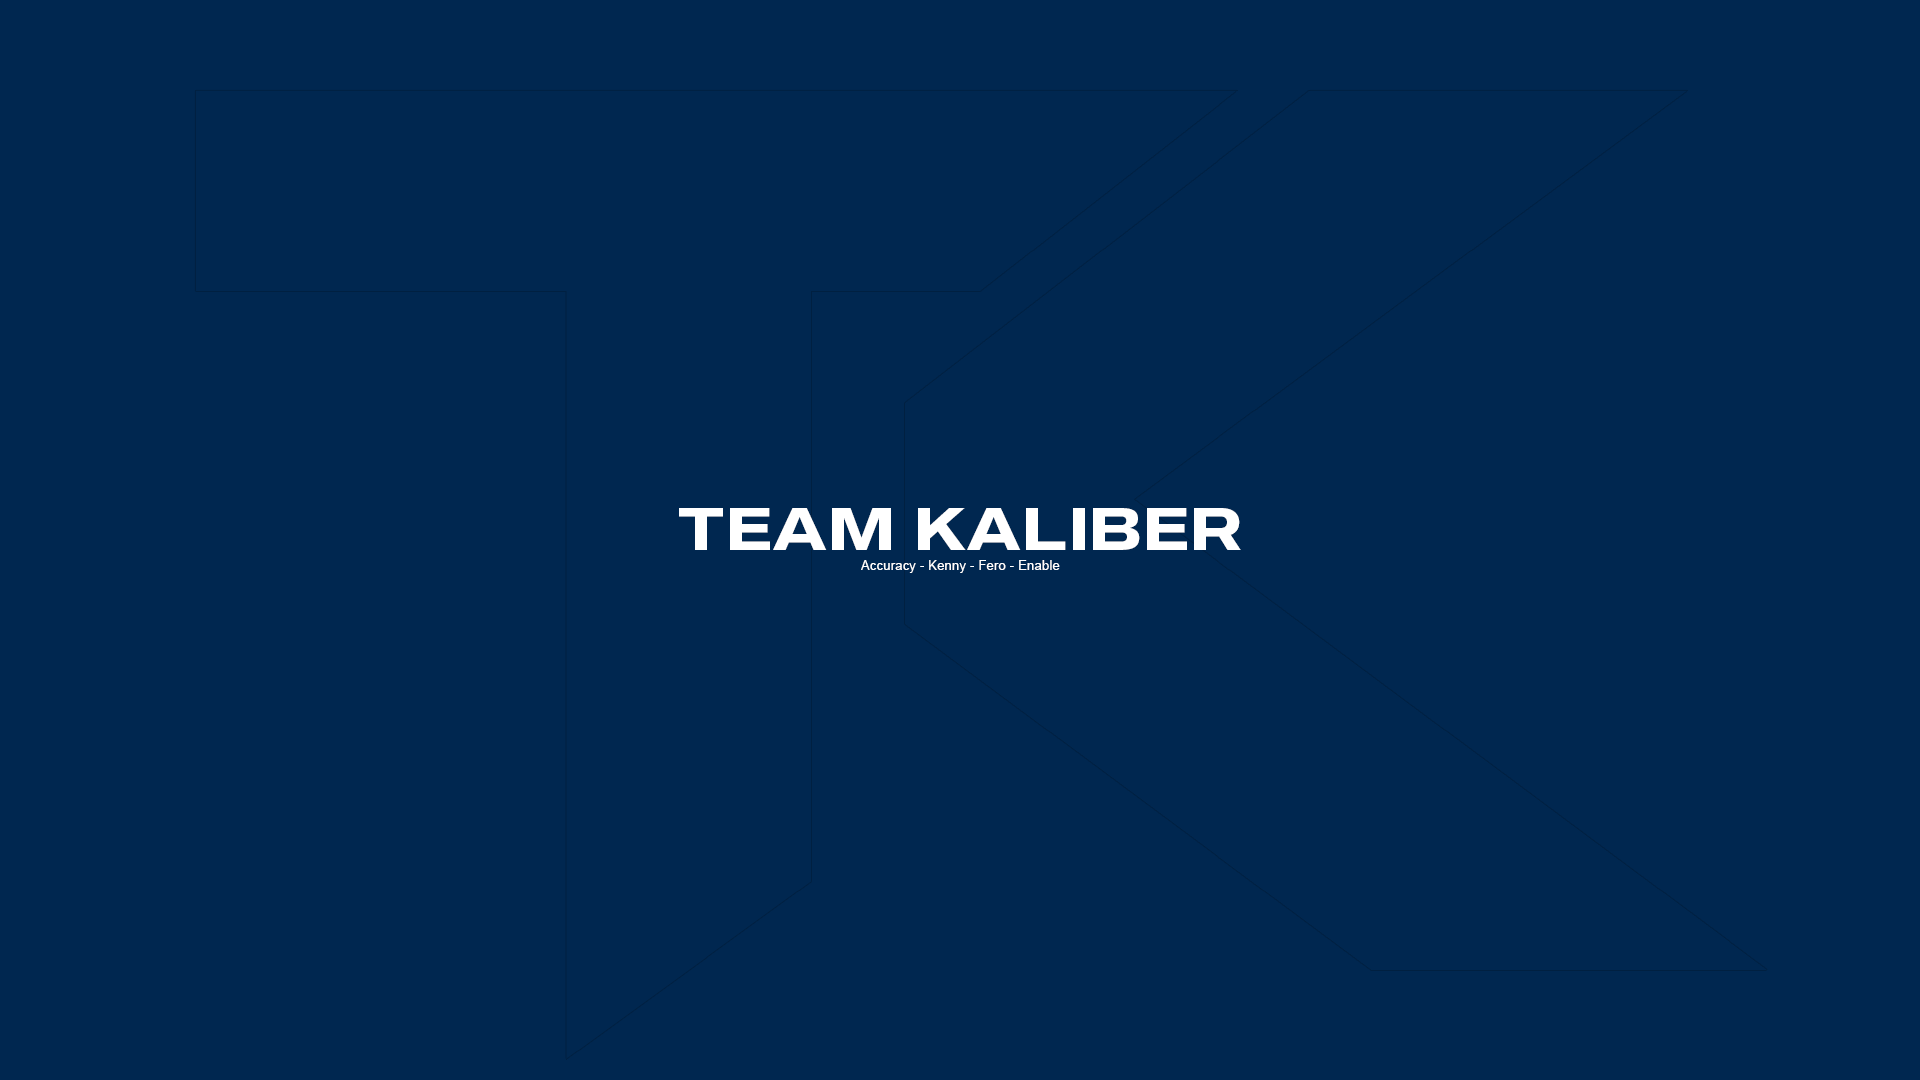 Making Wallpaper For A Bunch Of Pre CDL Teams And First On My List Is Team Kaliber. Gonna Be Doing More So Let Me Know Which Team You Want To See Next. HD